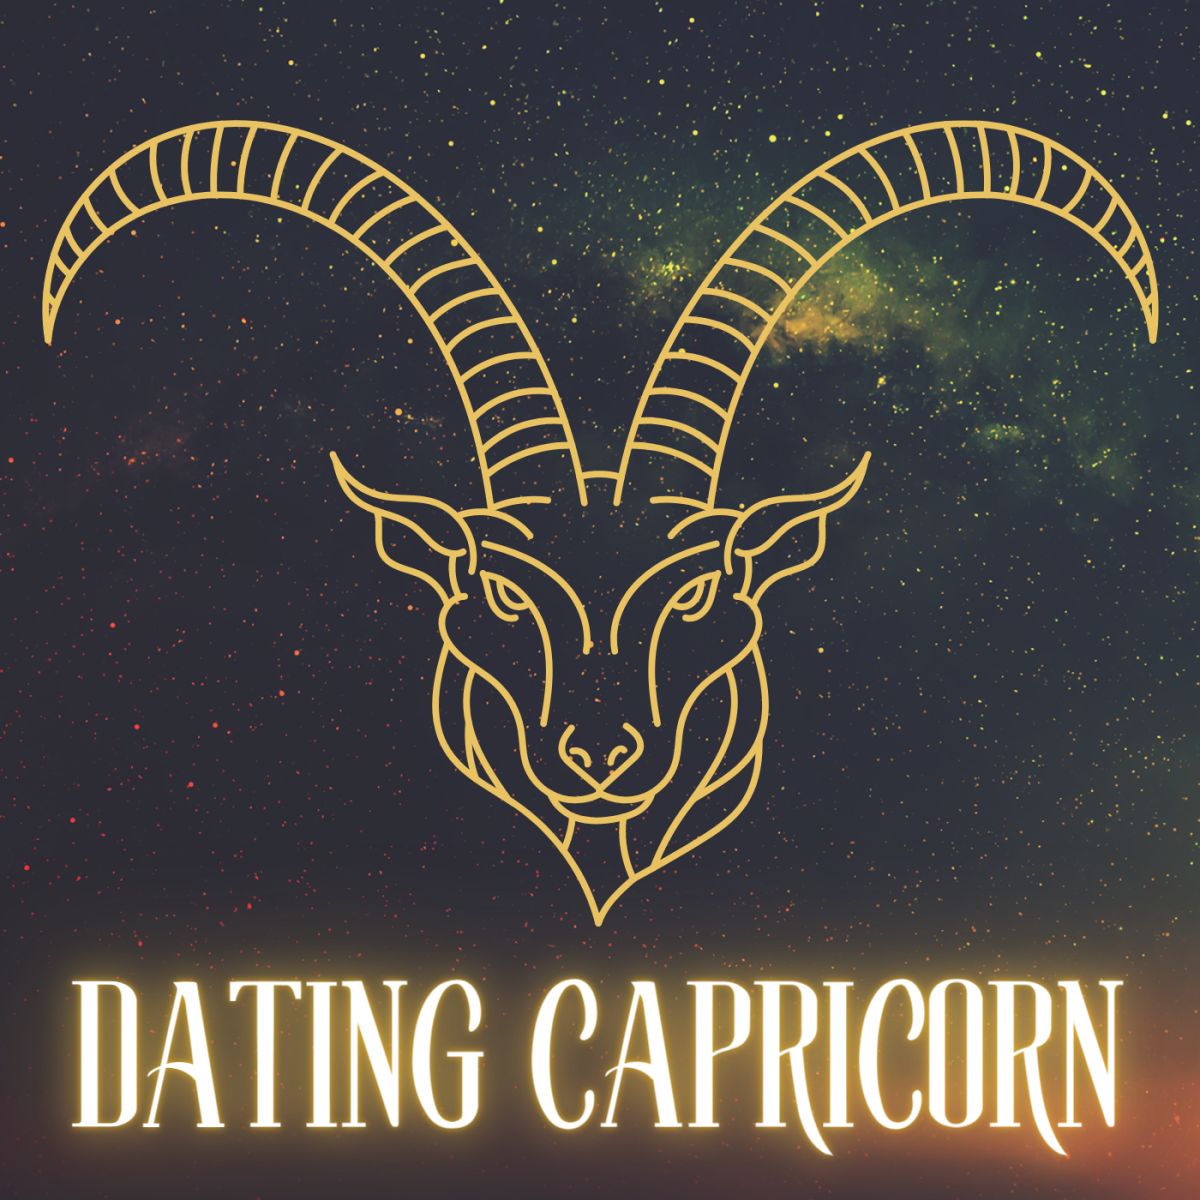 Images Of A Capricorn